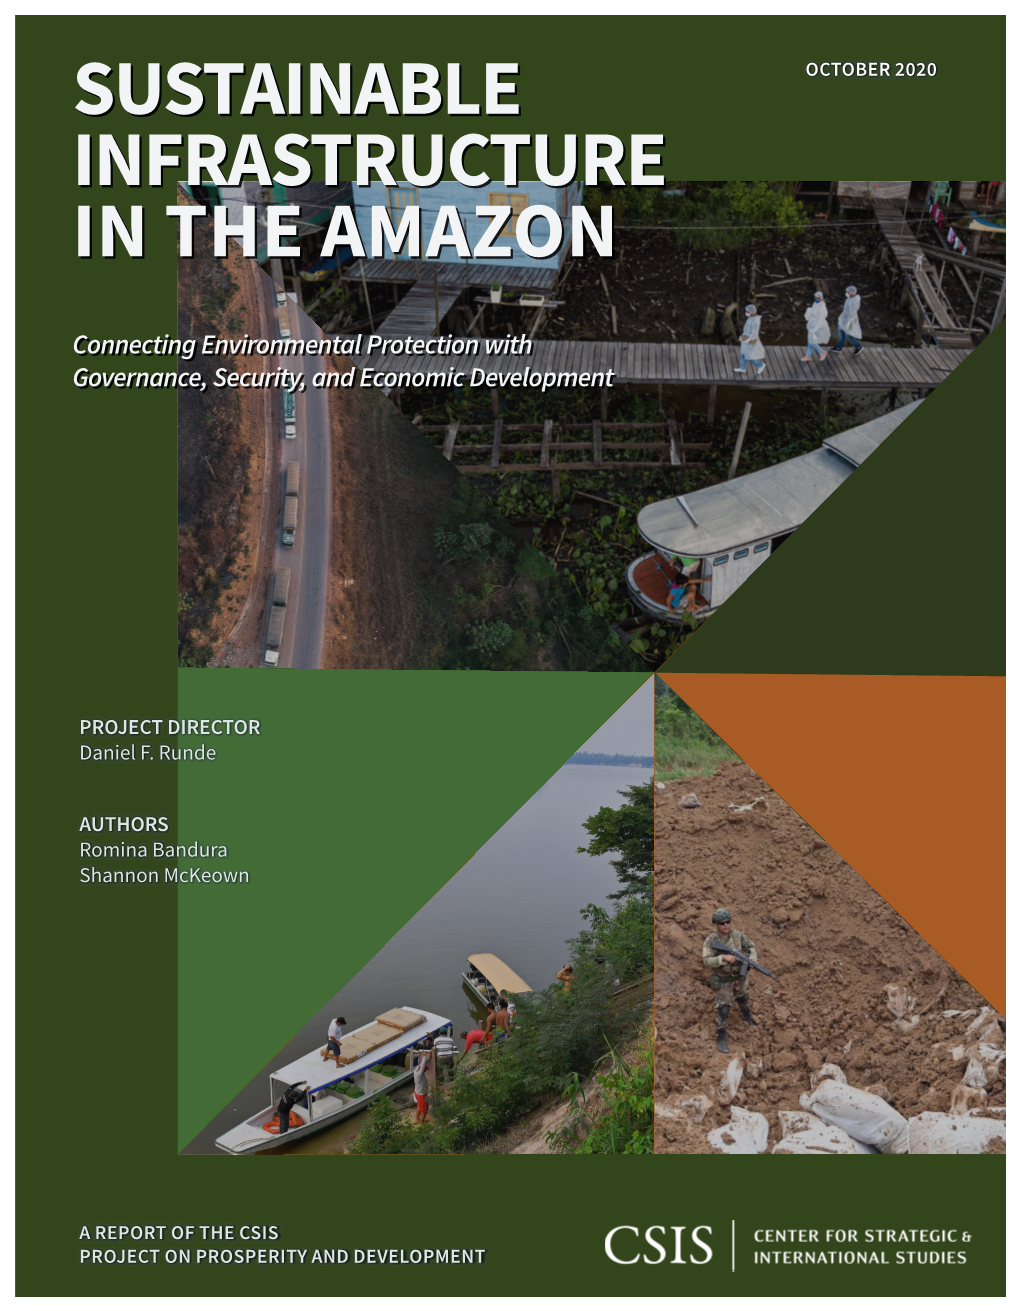 Developing Sustainable Infrastructure in the Amazon 43